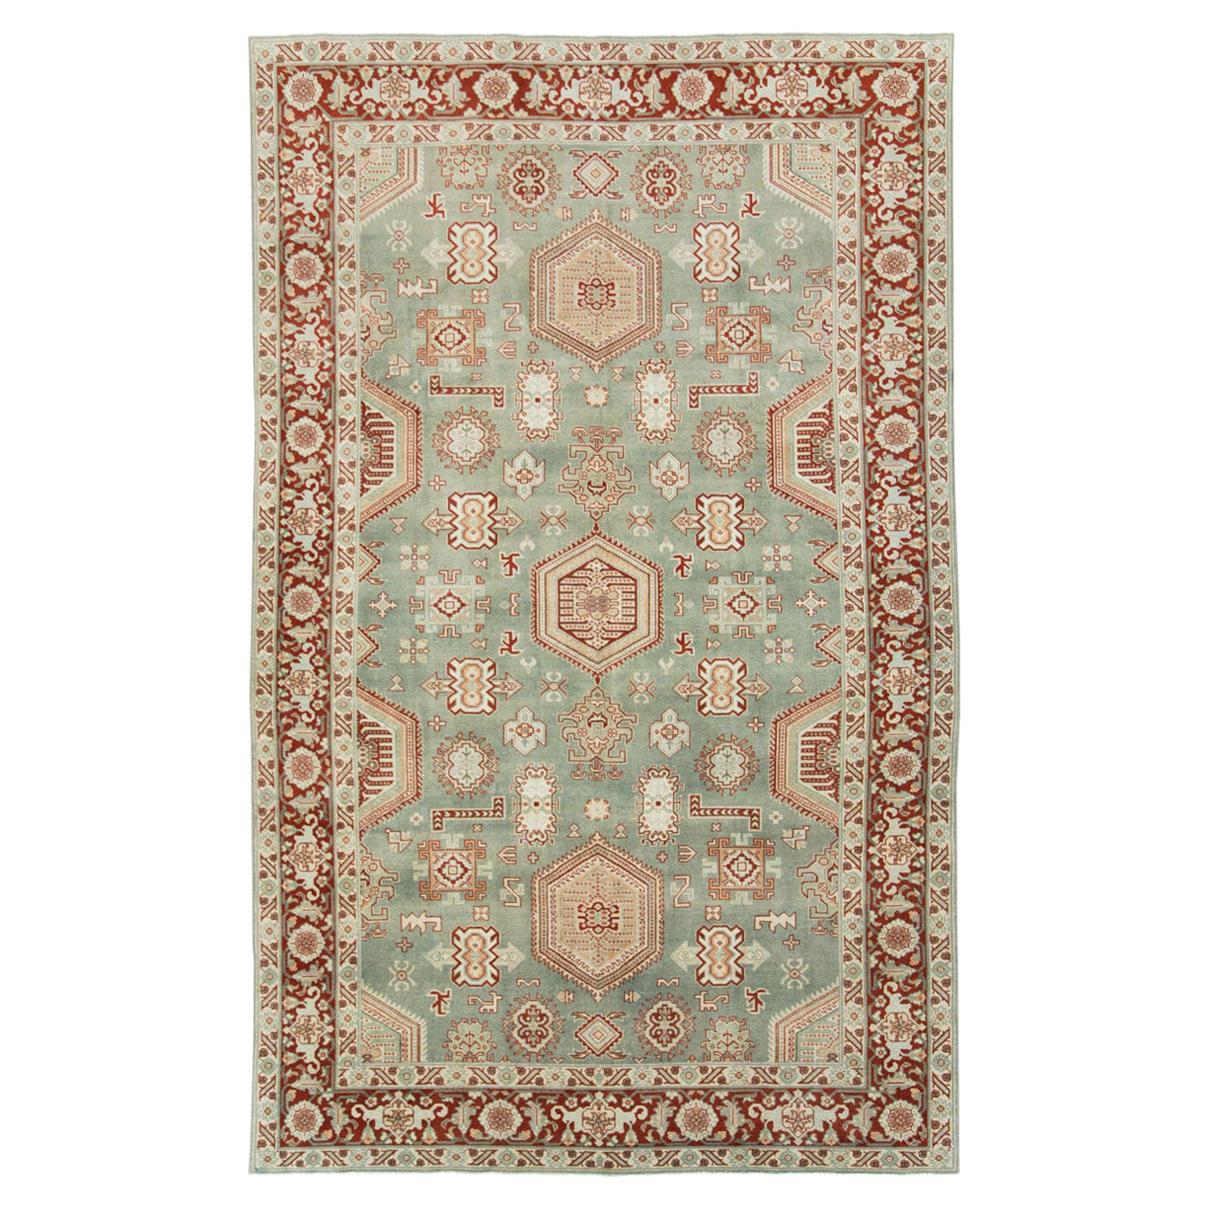 Mid-20th Century Handmade Persian Tabriz Accent Rug in Green and Rust Red